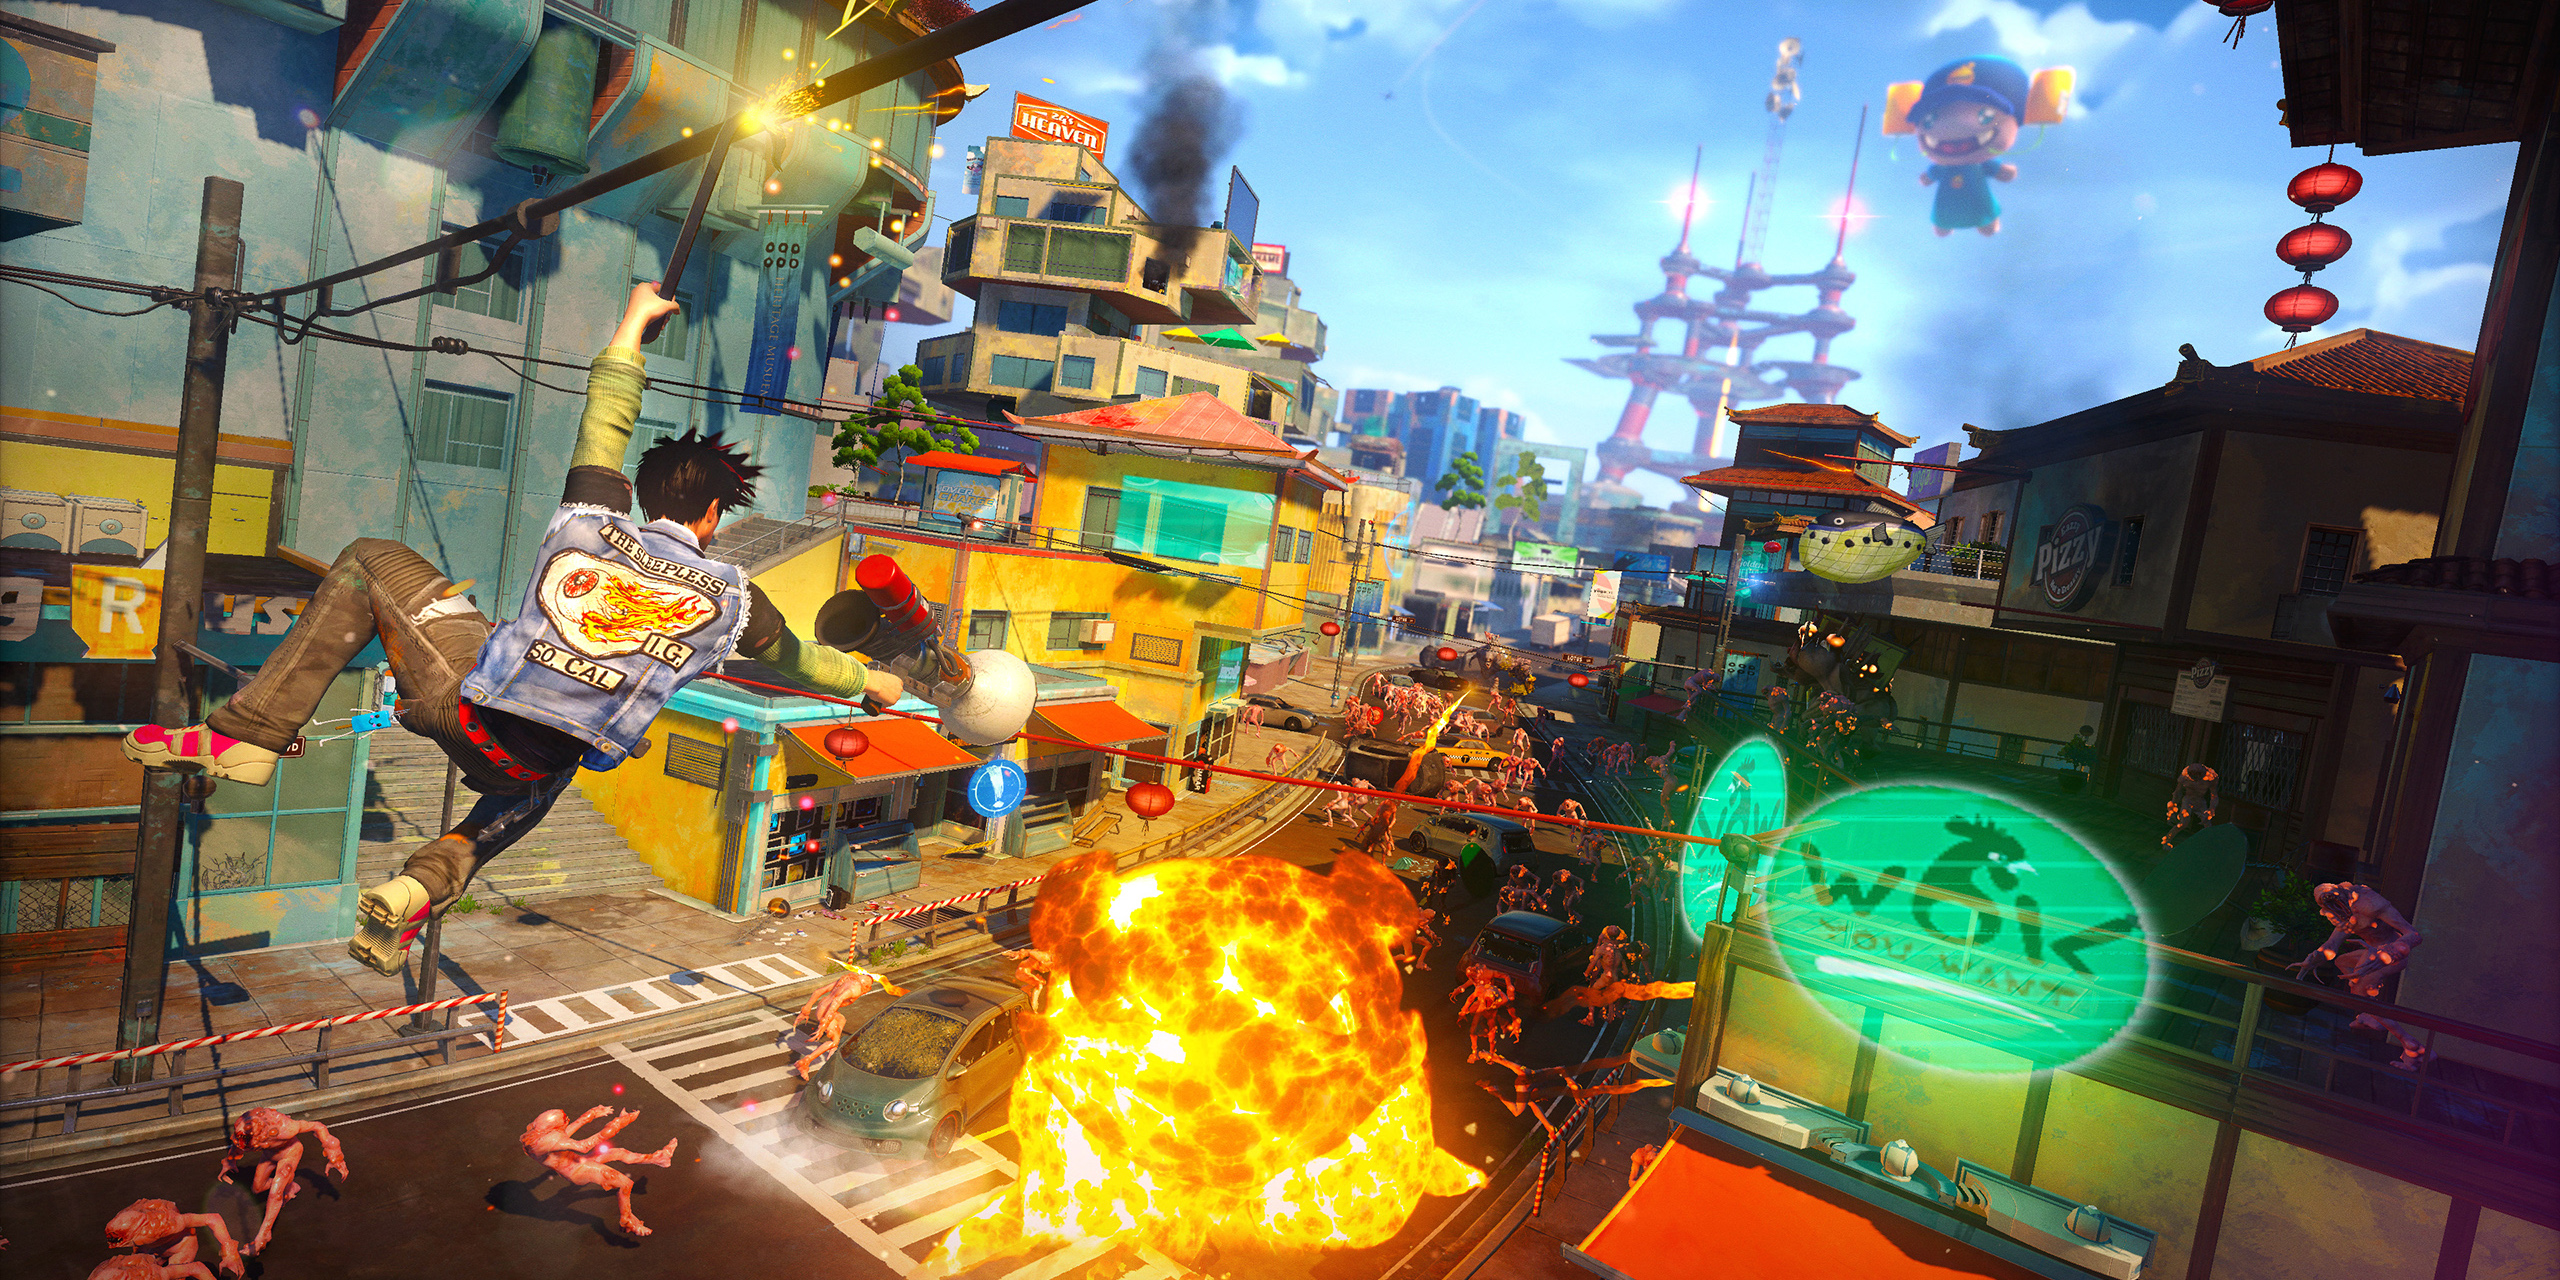 Xbox Live Gold's Free Games for April to Include 'Sunset Overdrive